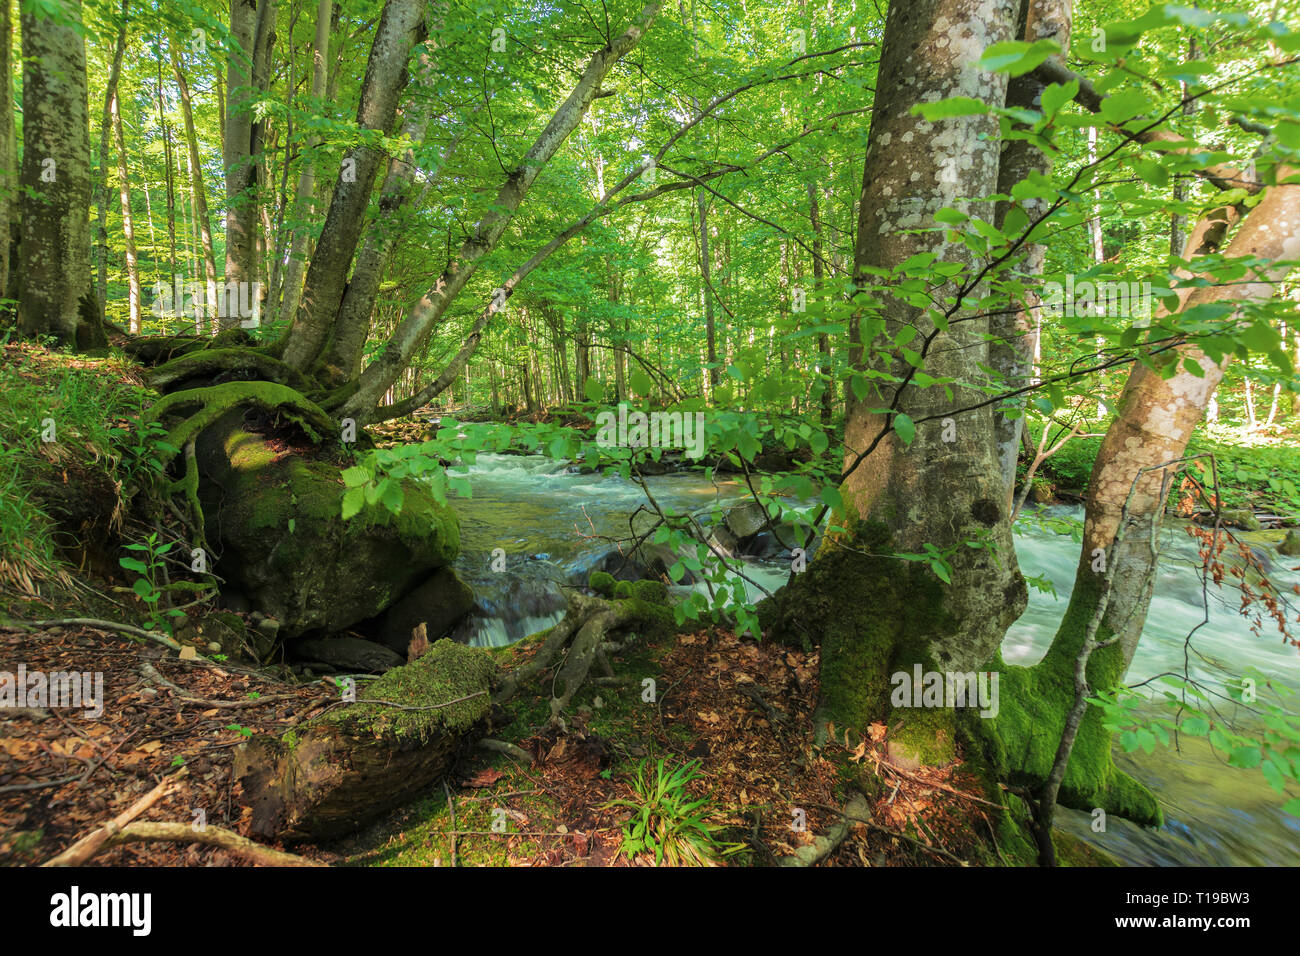 bank of the forest river. beautiful summer nature scenery. trees and mossy boulders on the edge of a shore in dappled light. long exposure Stock Photo